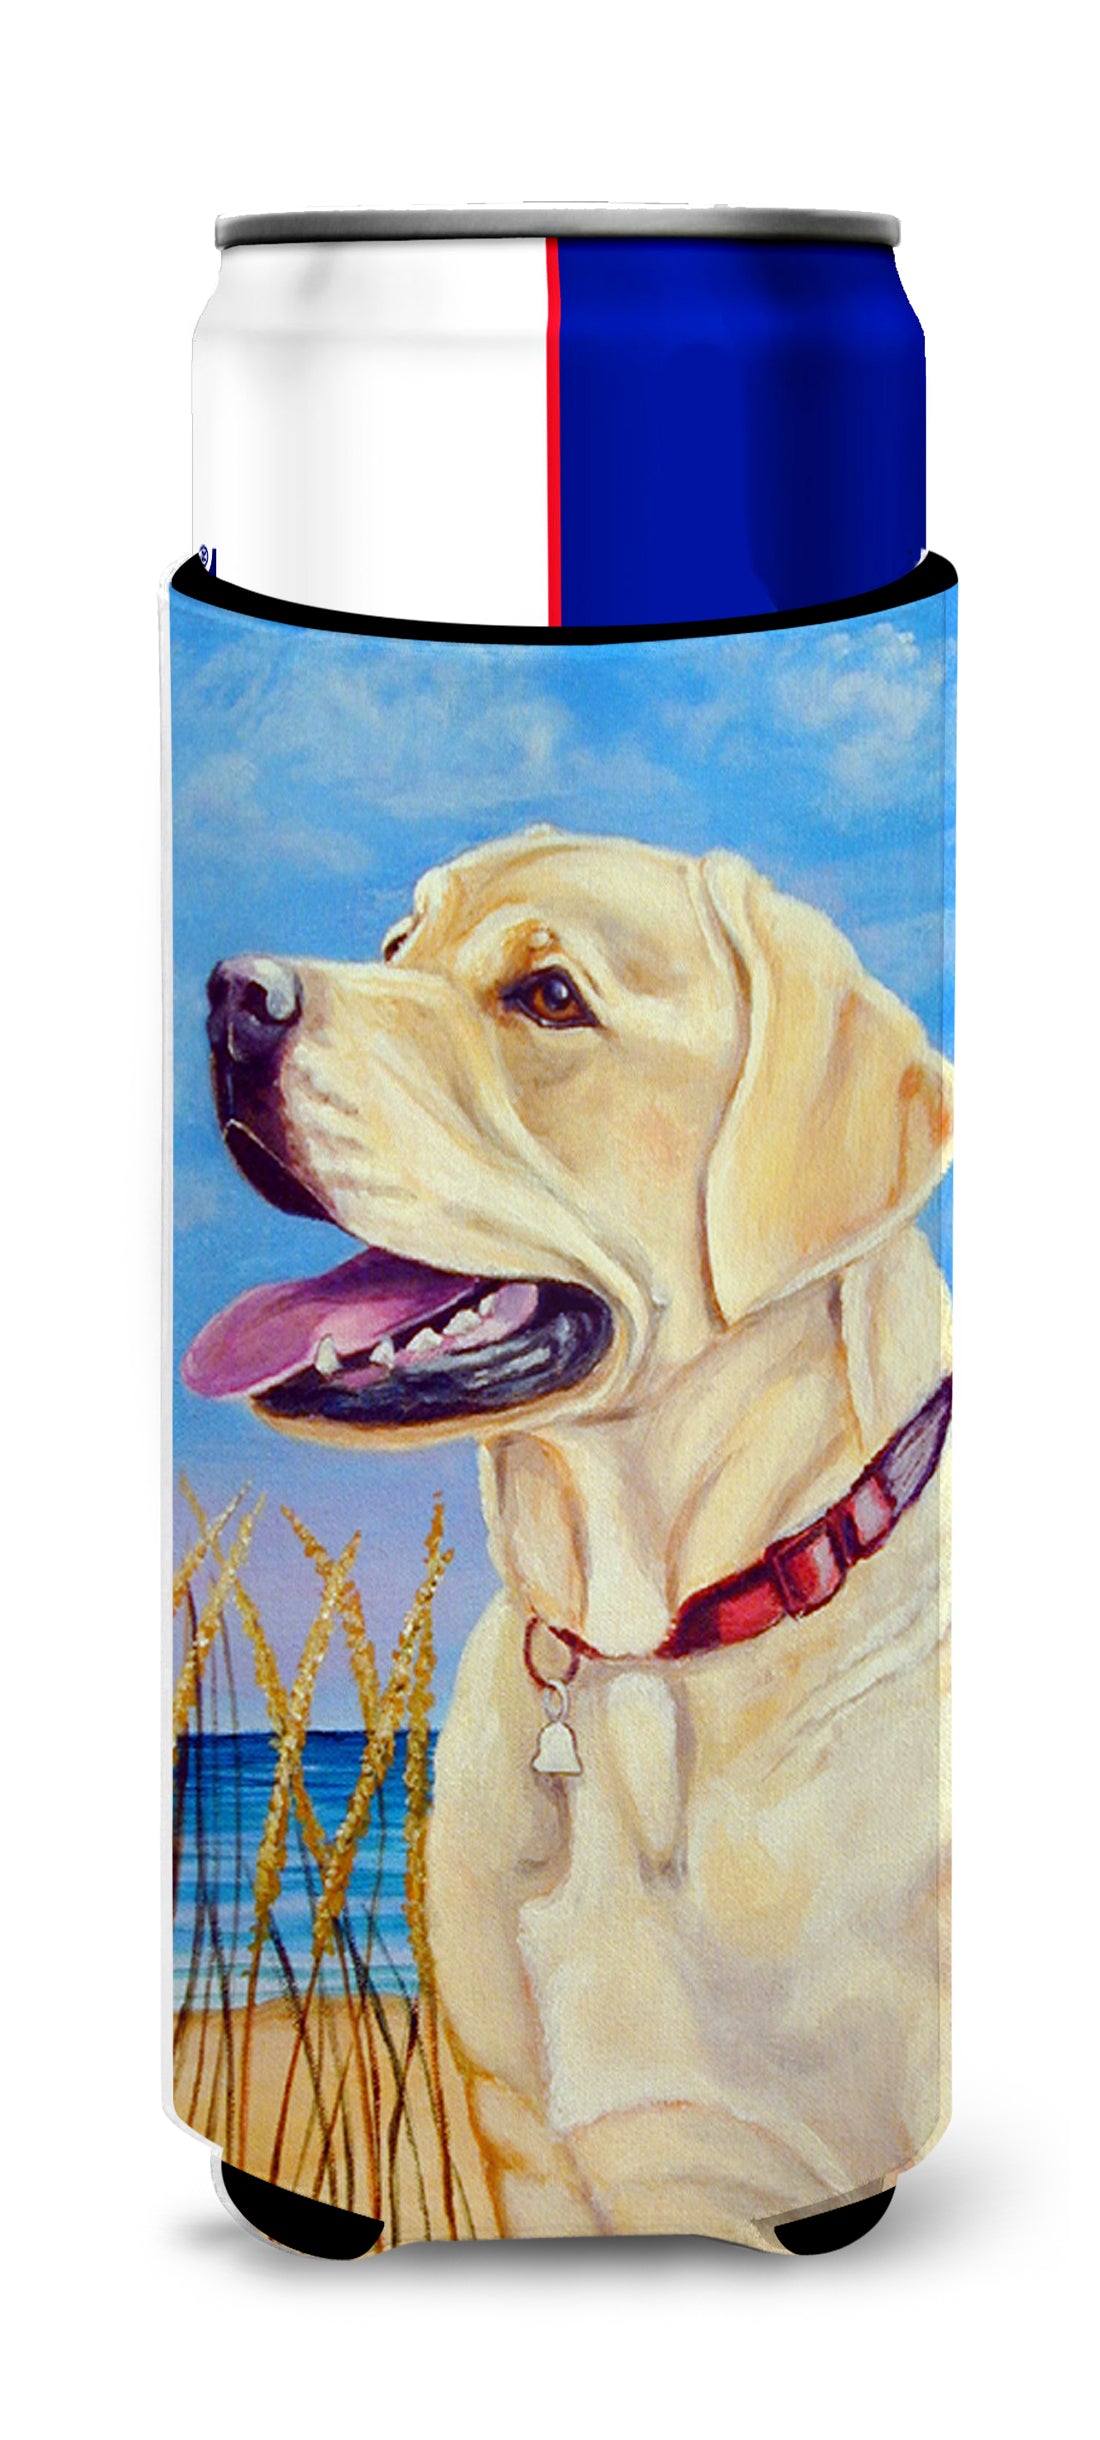 Yellow Labrador at the Beach Ultra Beverage Insulators for slim cans 7158MUK.